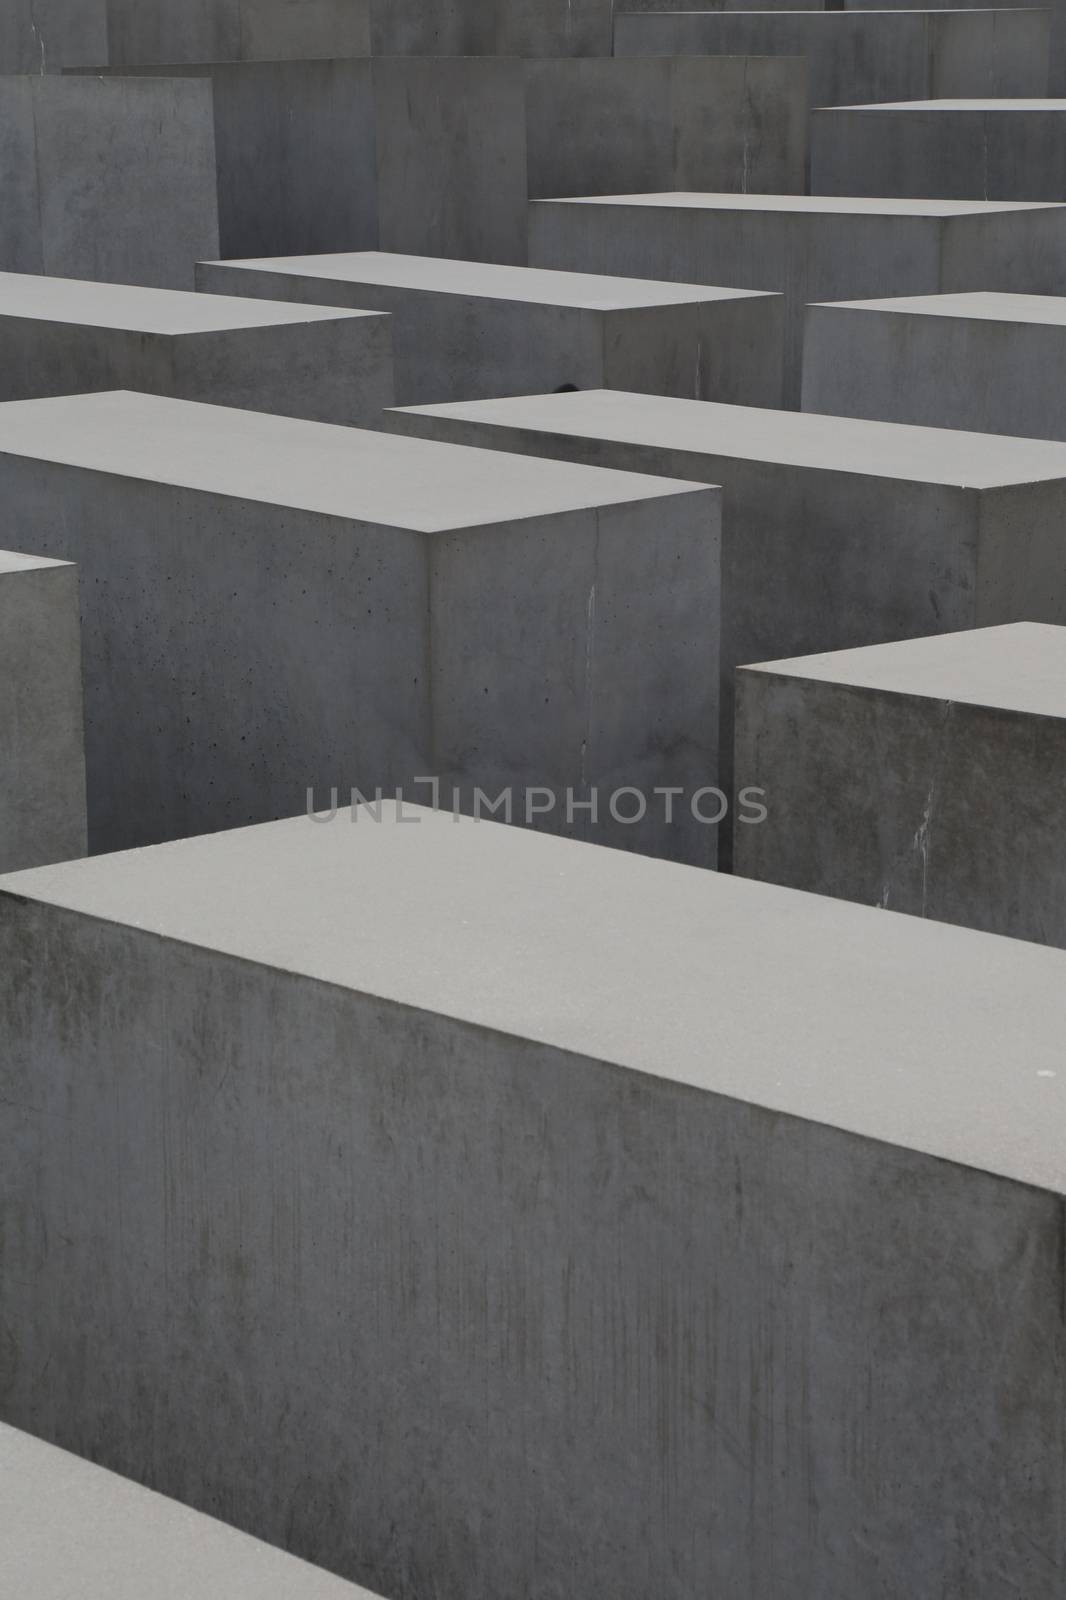 The Memorial to the Murdered Jews of Europe also known as the Holocaust Memorial in Berlin - Germany